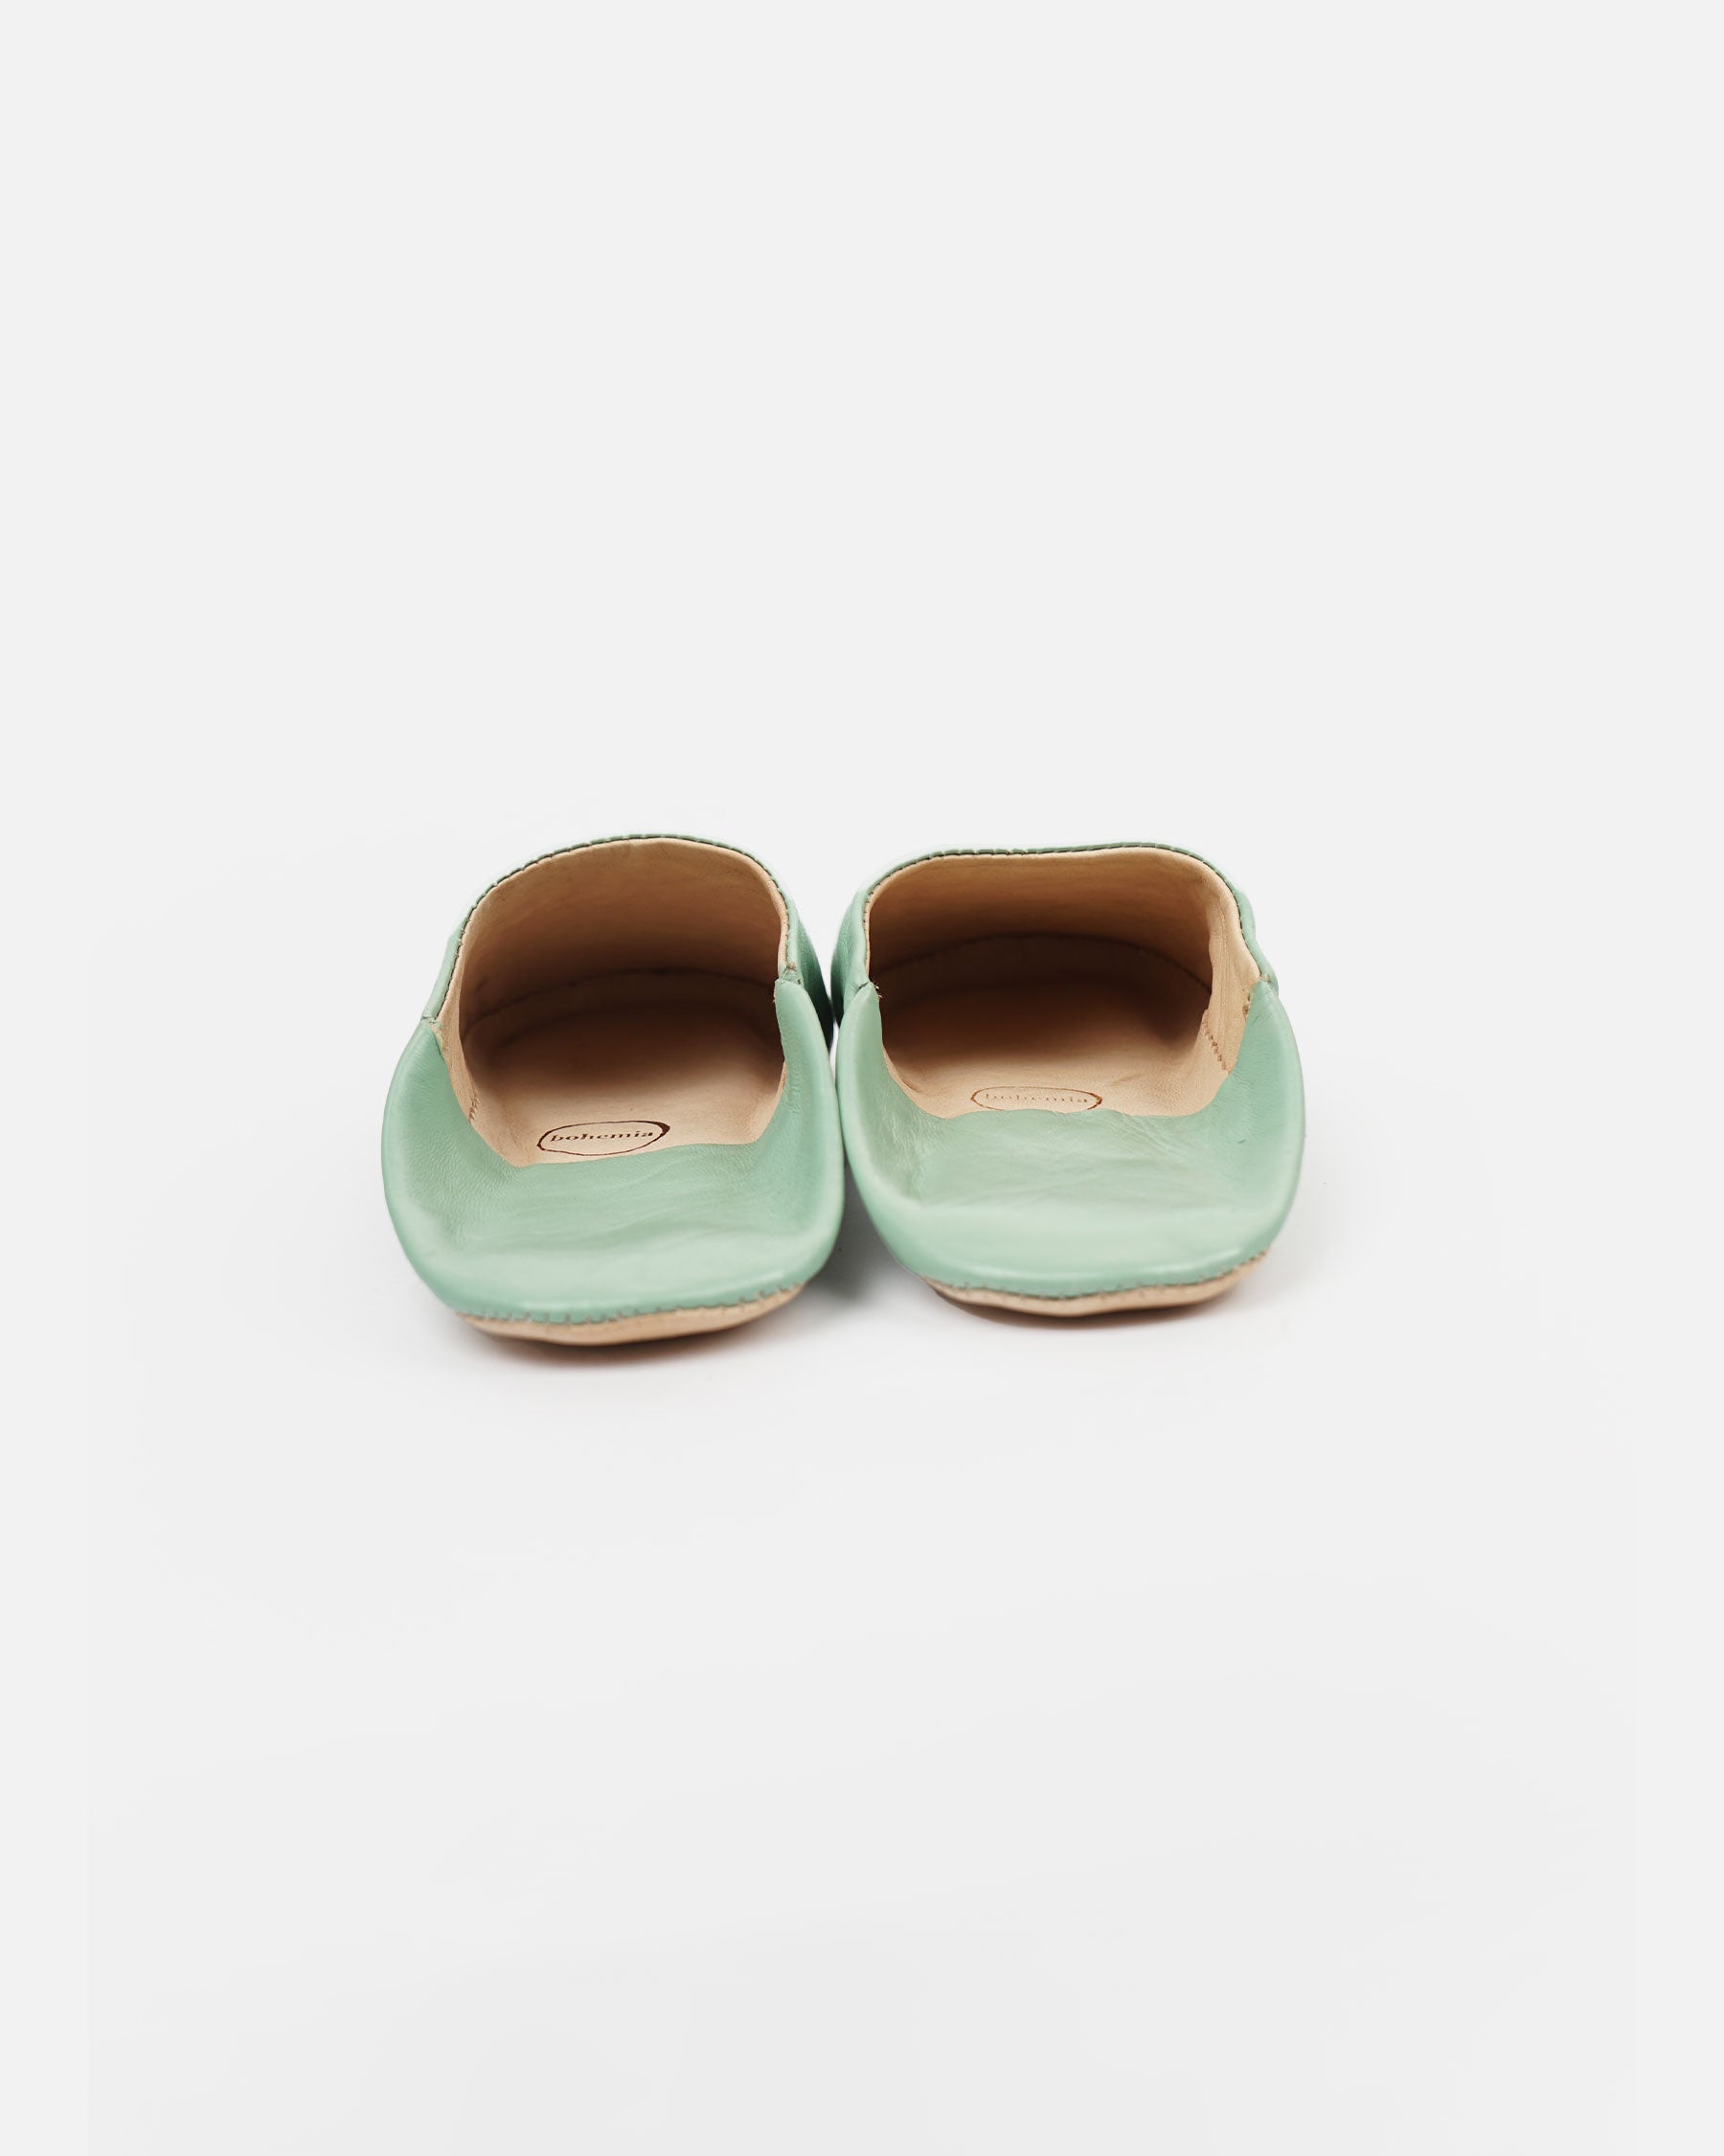 Moroccan Babouche Basic Slippers, Mint